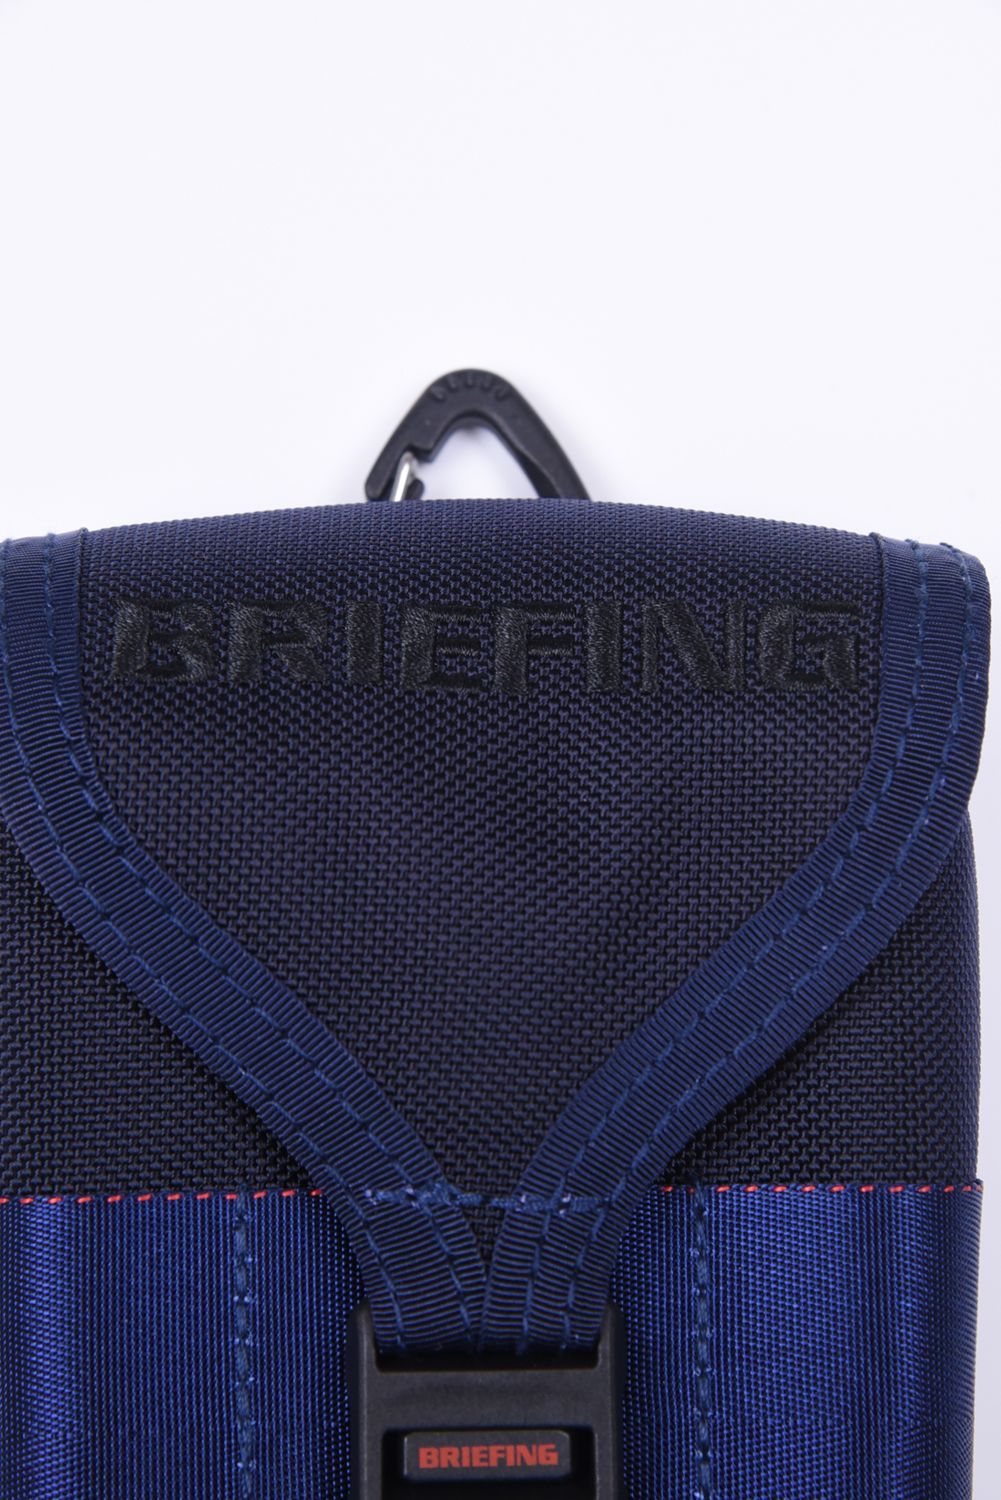 BRIEFING - 【1680Dエアバリスティックナイロン】 SCOPE BOX POUCH 